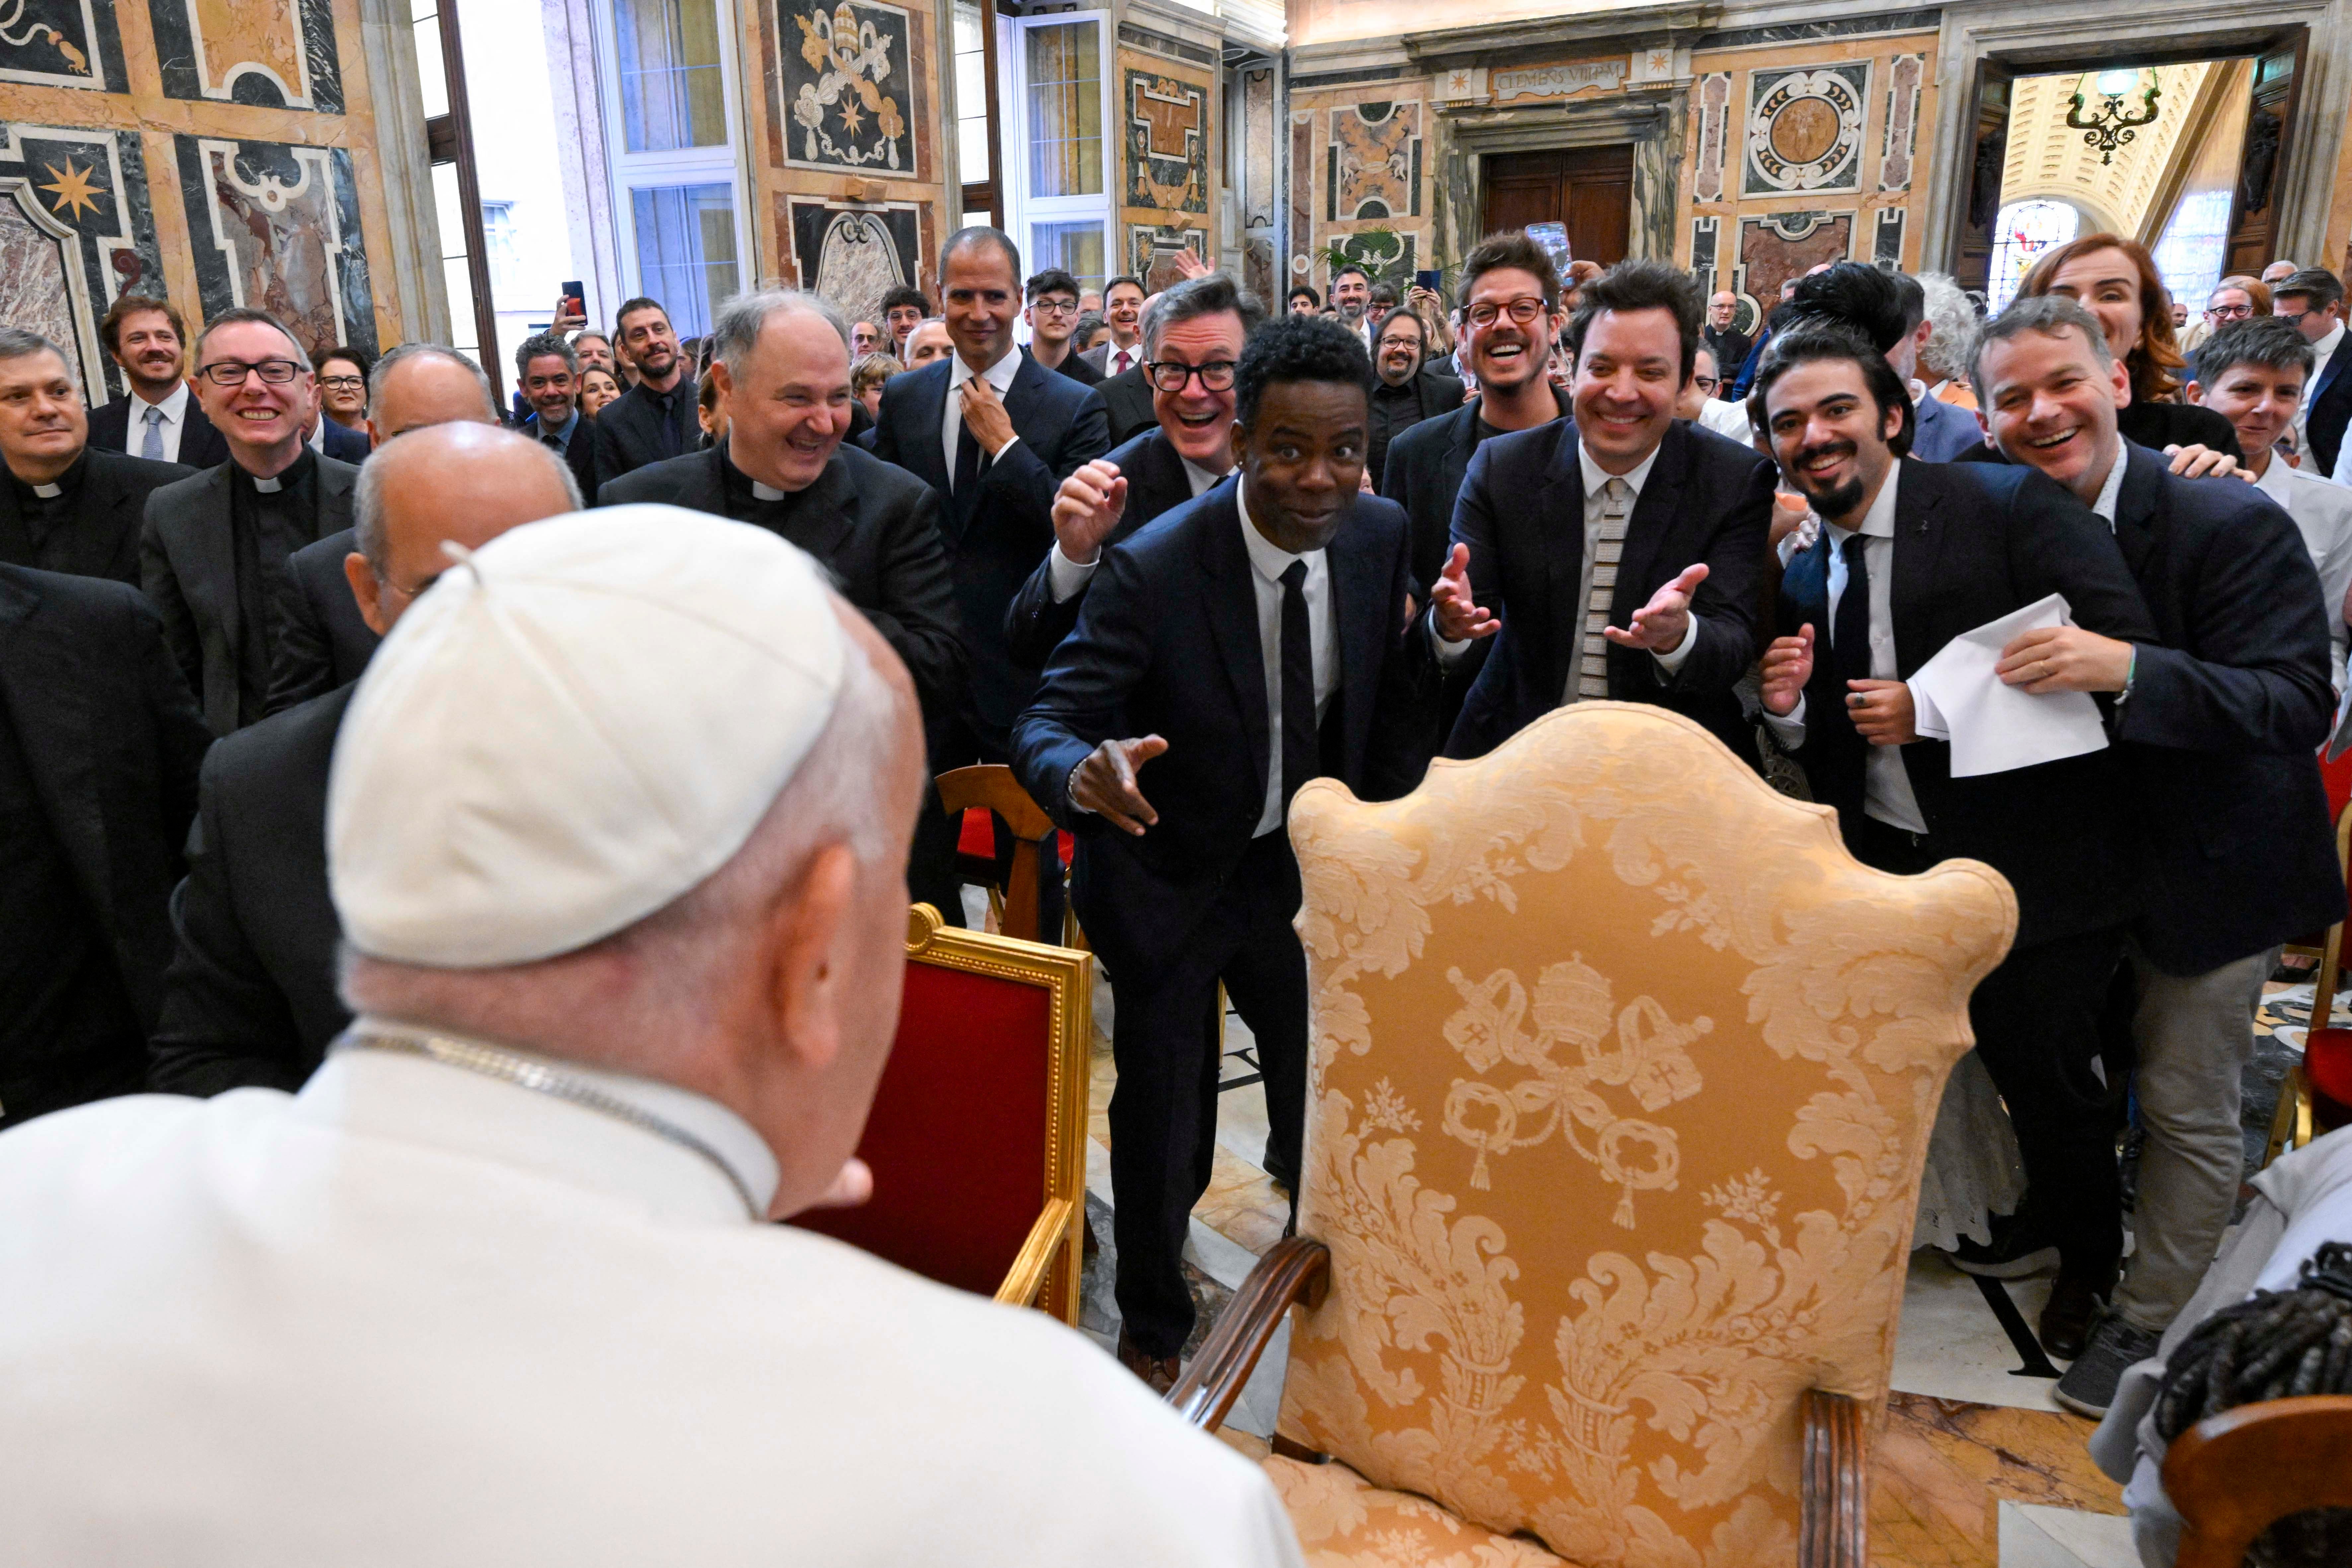 Stephen Colbert, Chris Rock and Jimmy Fallon were among those to meet Pope Francis